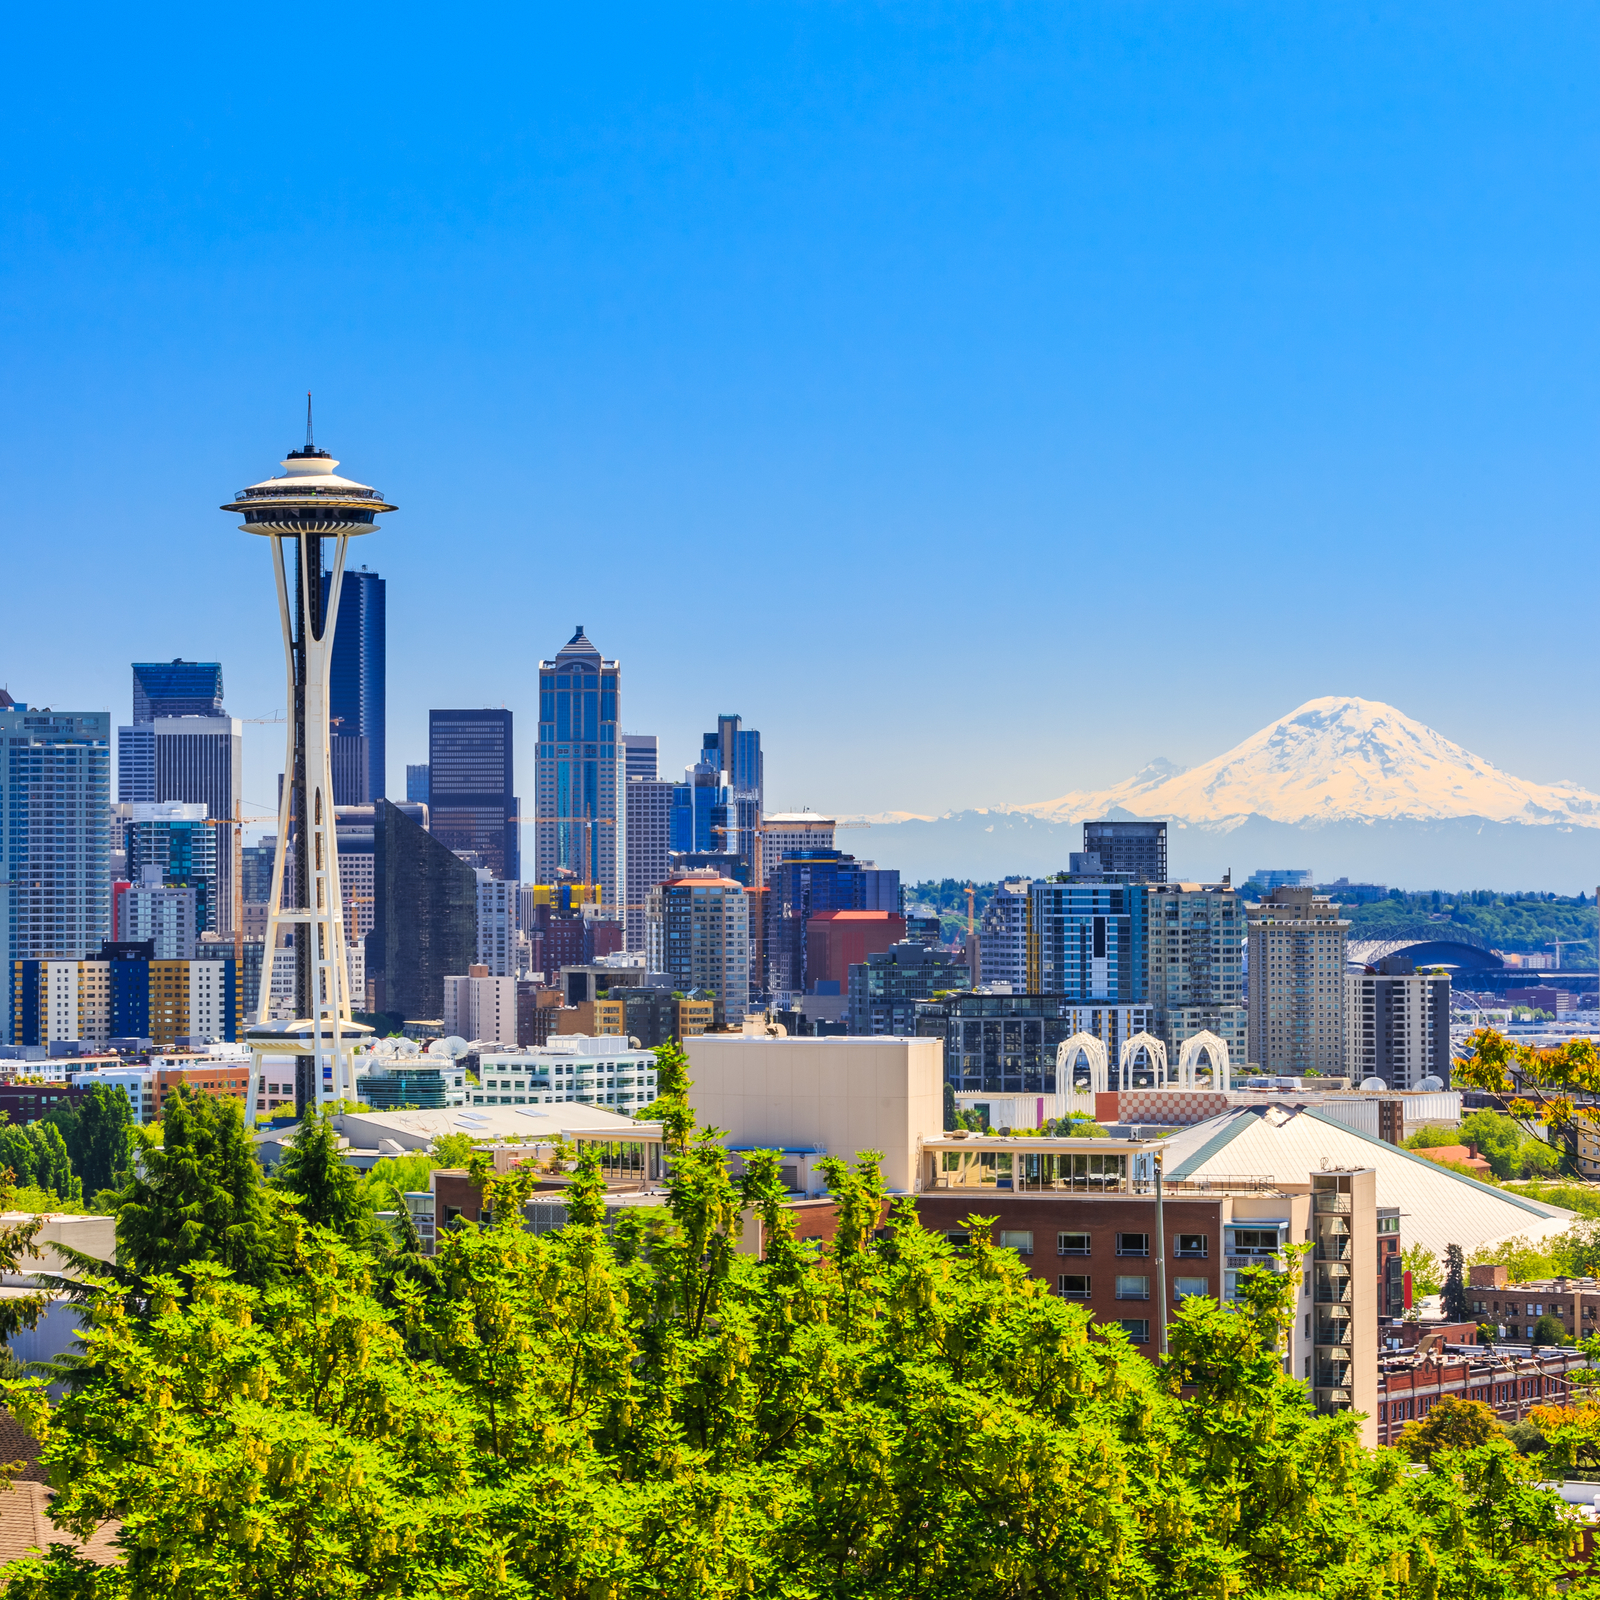 Aerospace Engineer Uses Bitcoin Cash to Buy $415,000 Home in Seattle